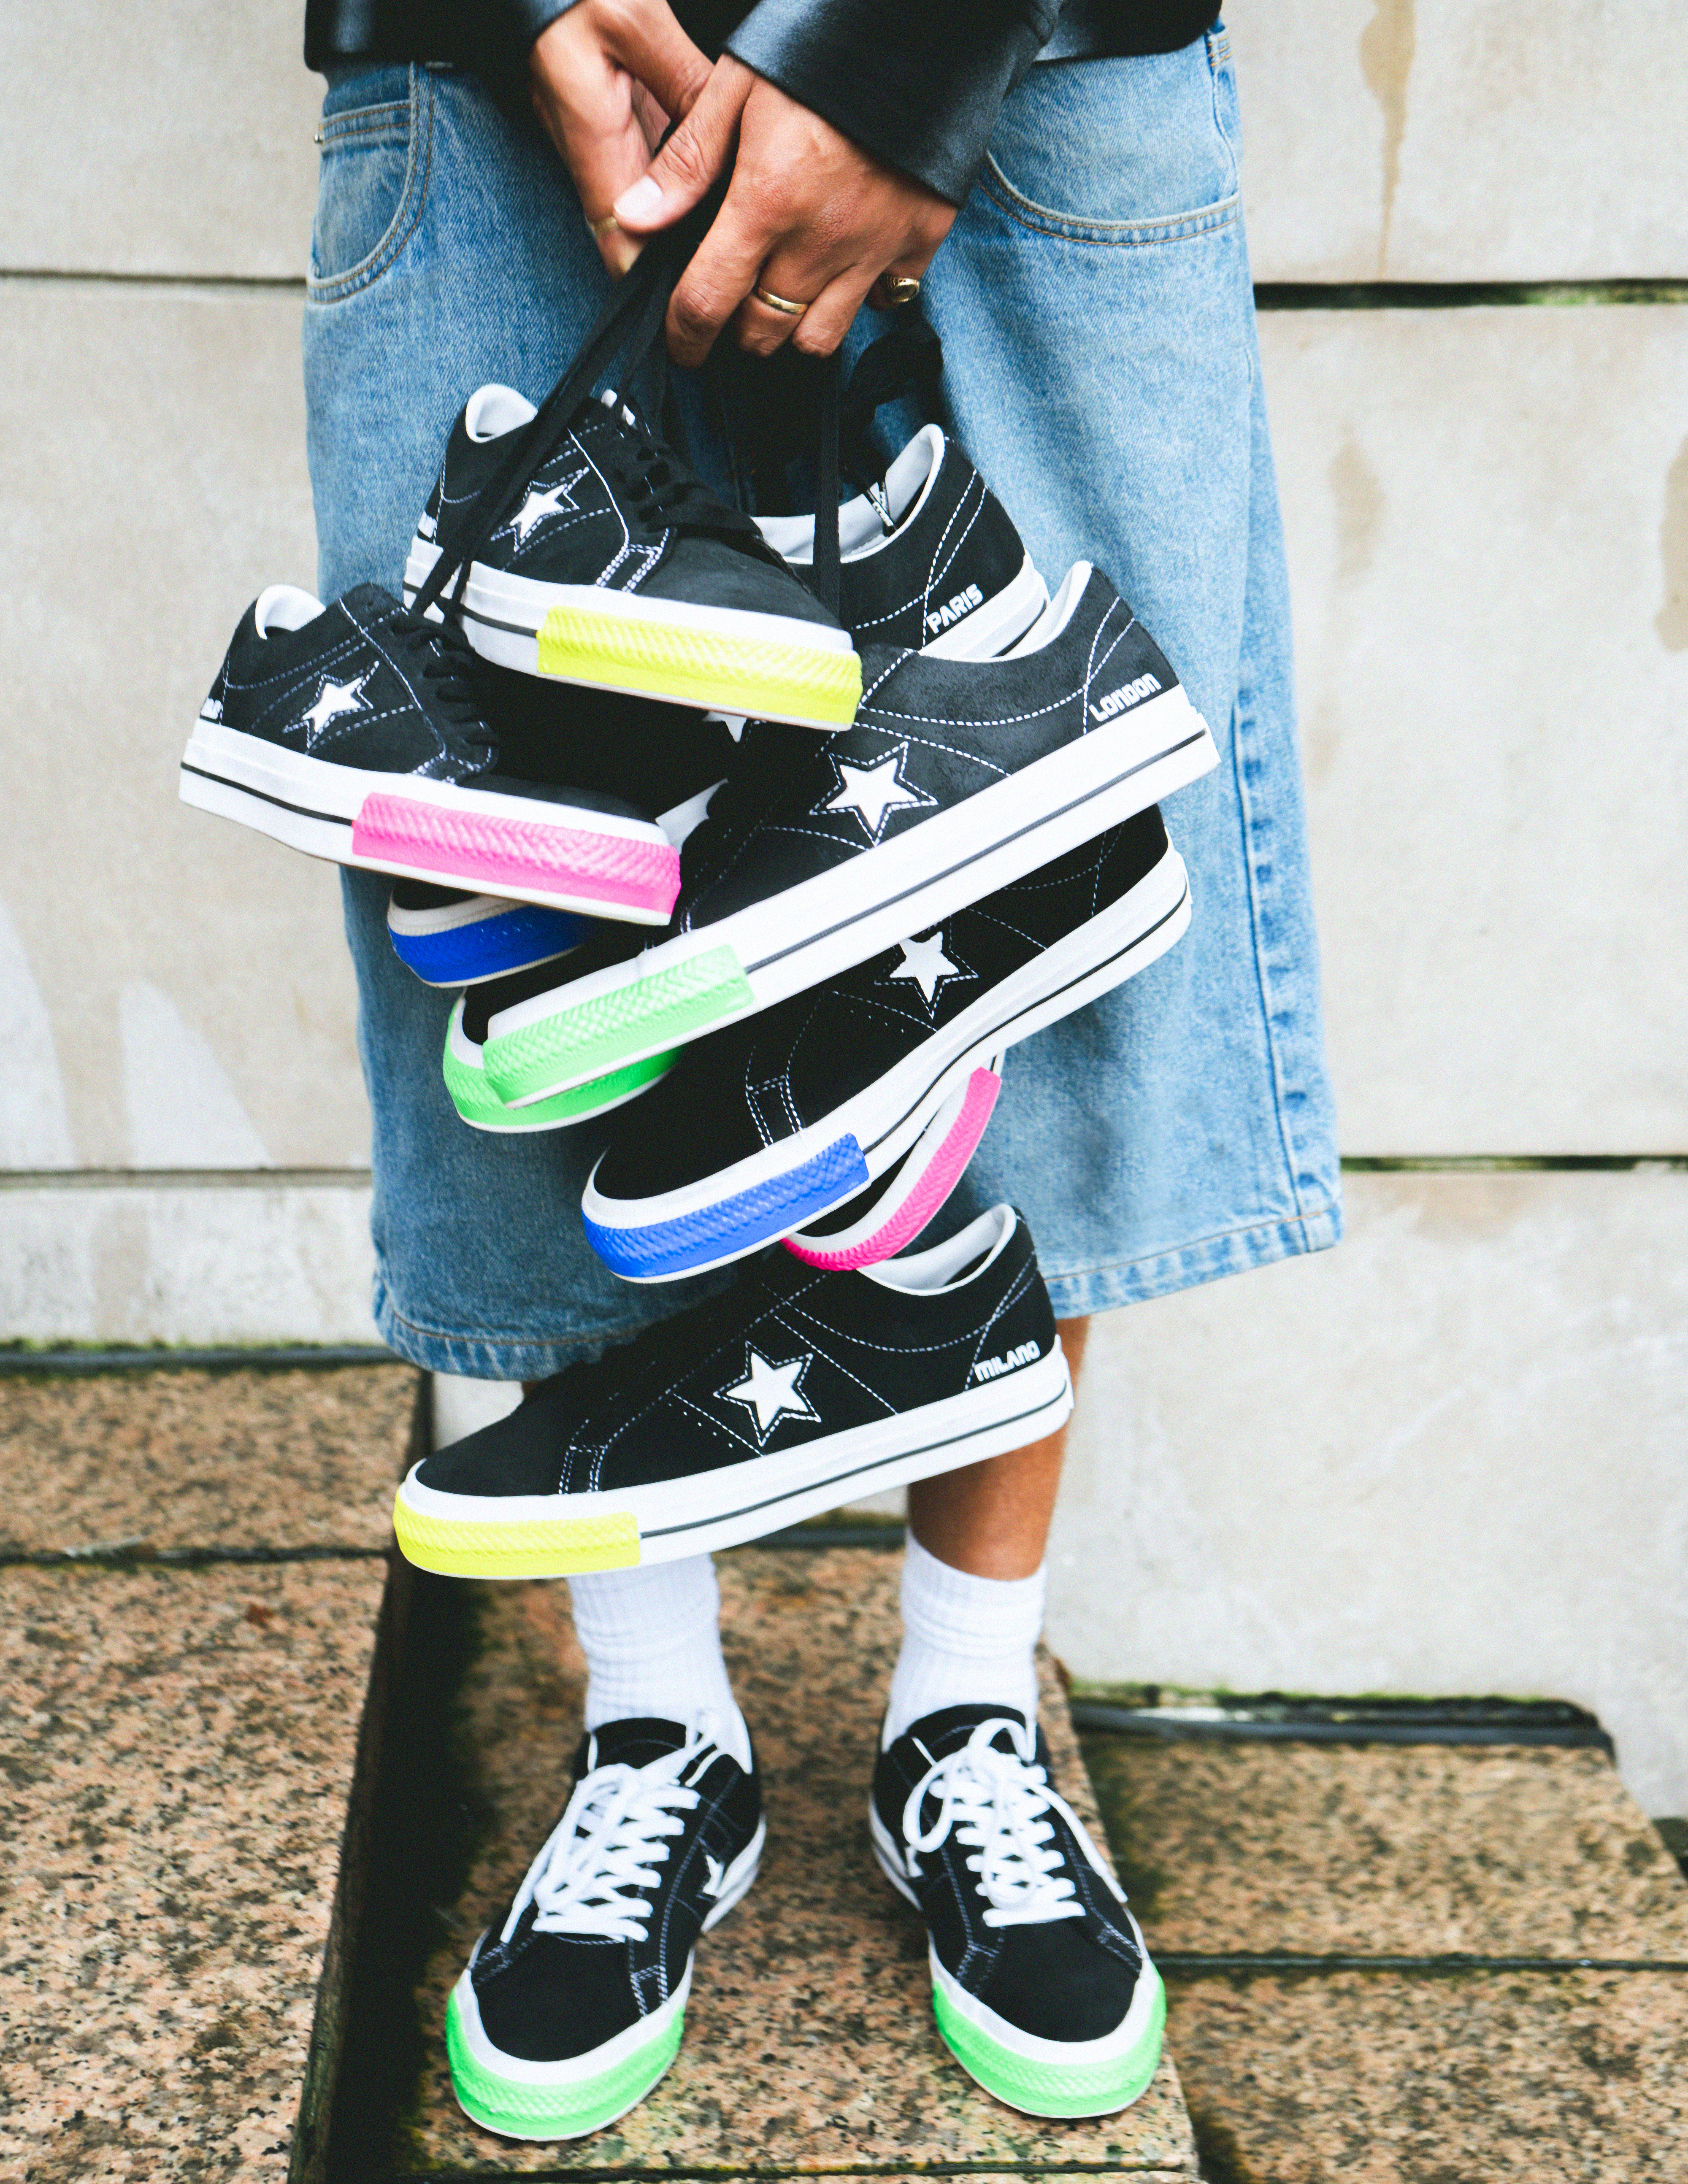 converse one star city pack